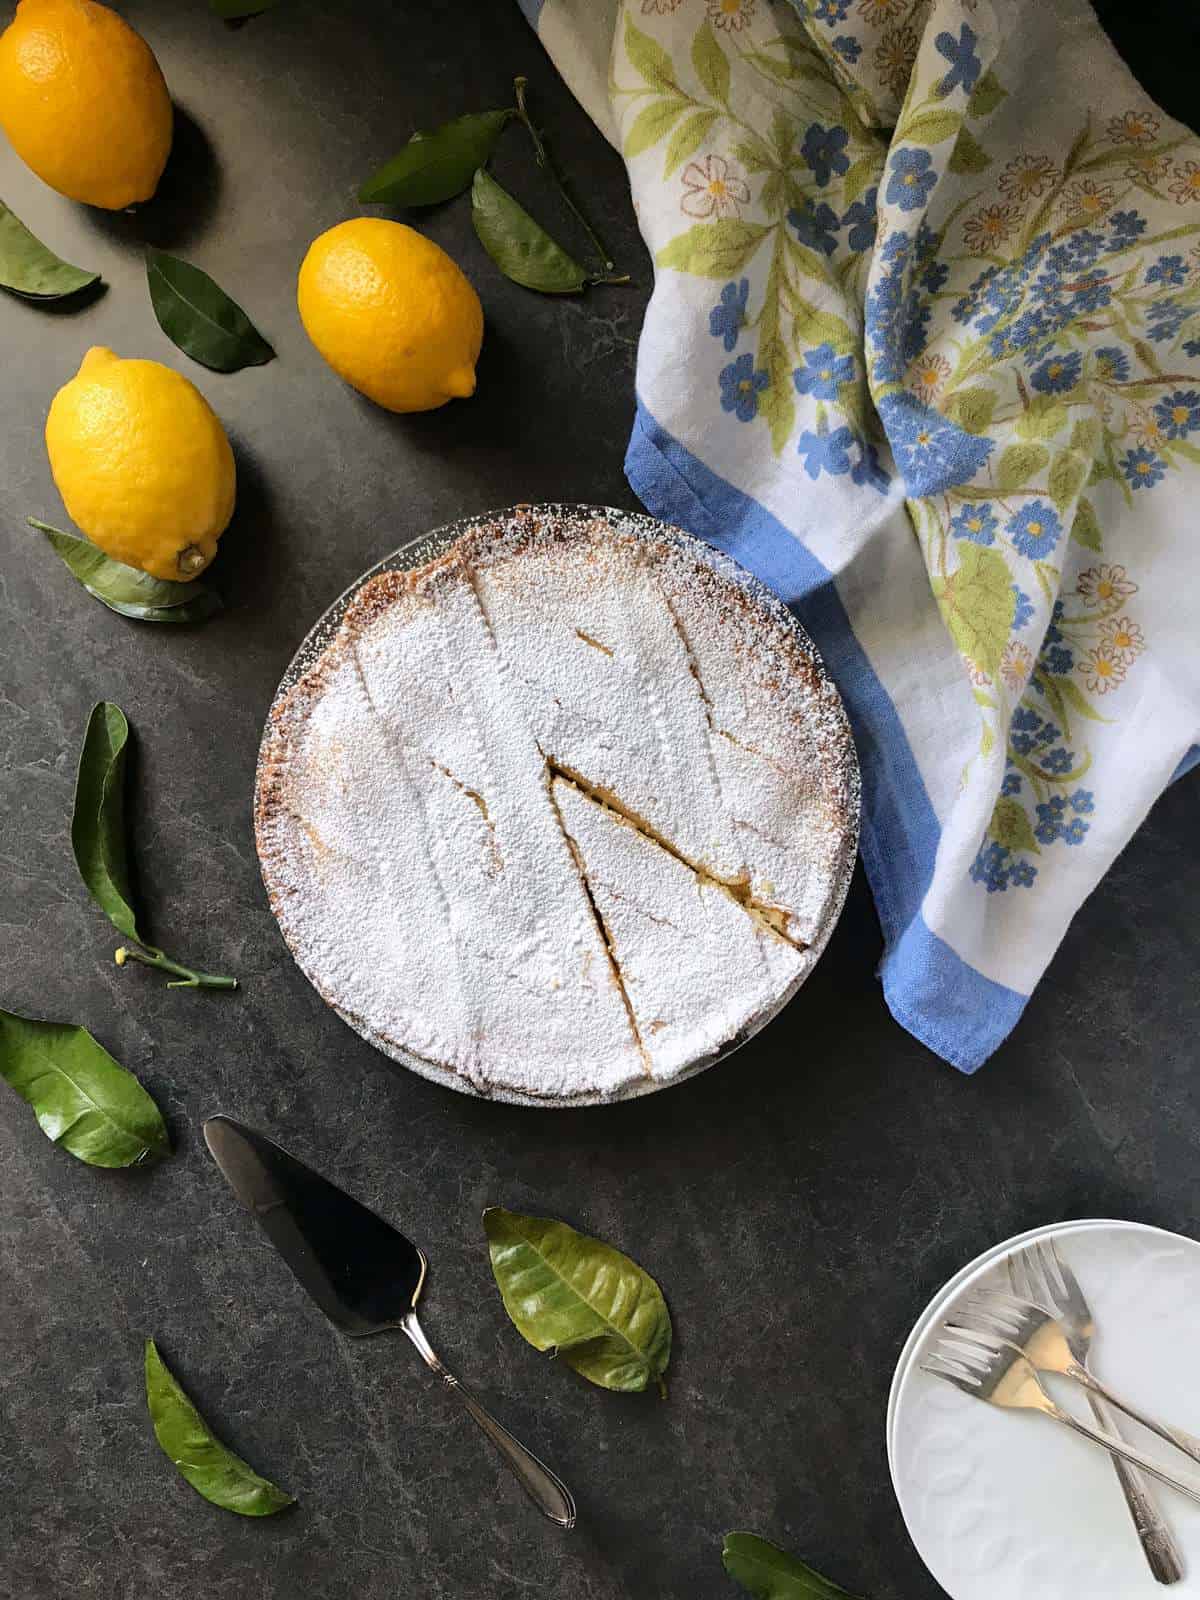 An overhead shot of a ricotta pie, dusted with icing sugar and surrounded by lemons and a floral tea towel.